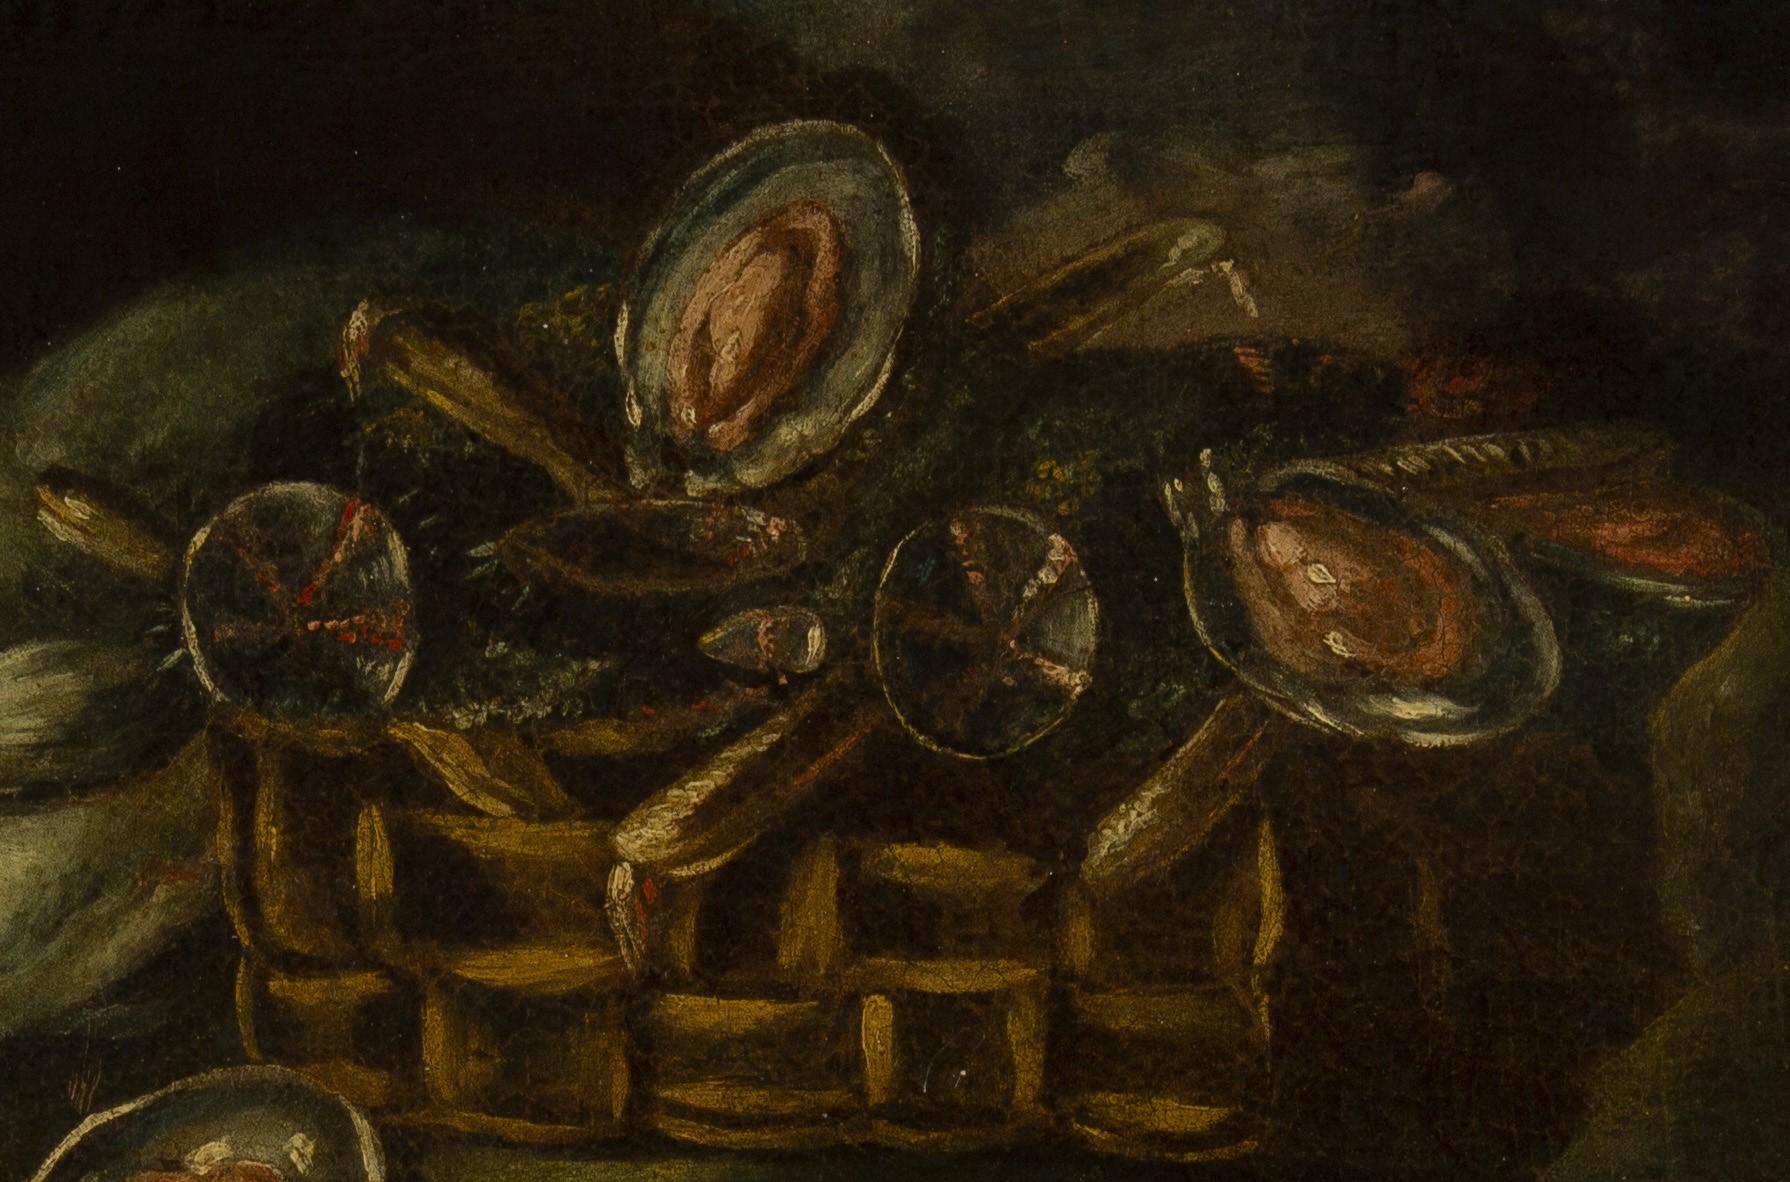 Antique 17th century French Baroque Still Life with Fish.

Net size: 35 x 62 cm
Size with frame: 53.5 x 79.5 cm

Restaured.